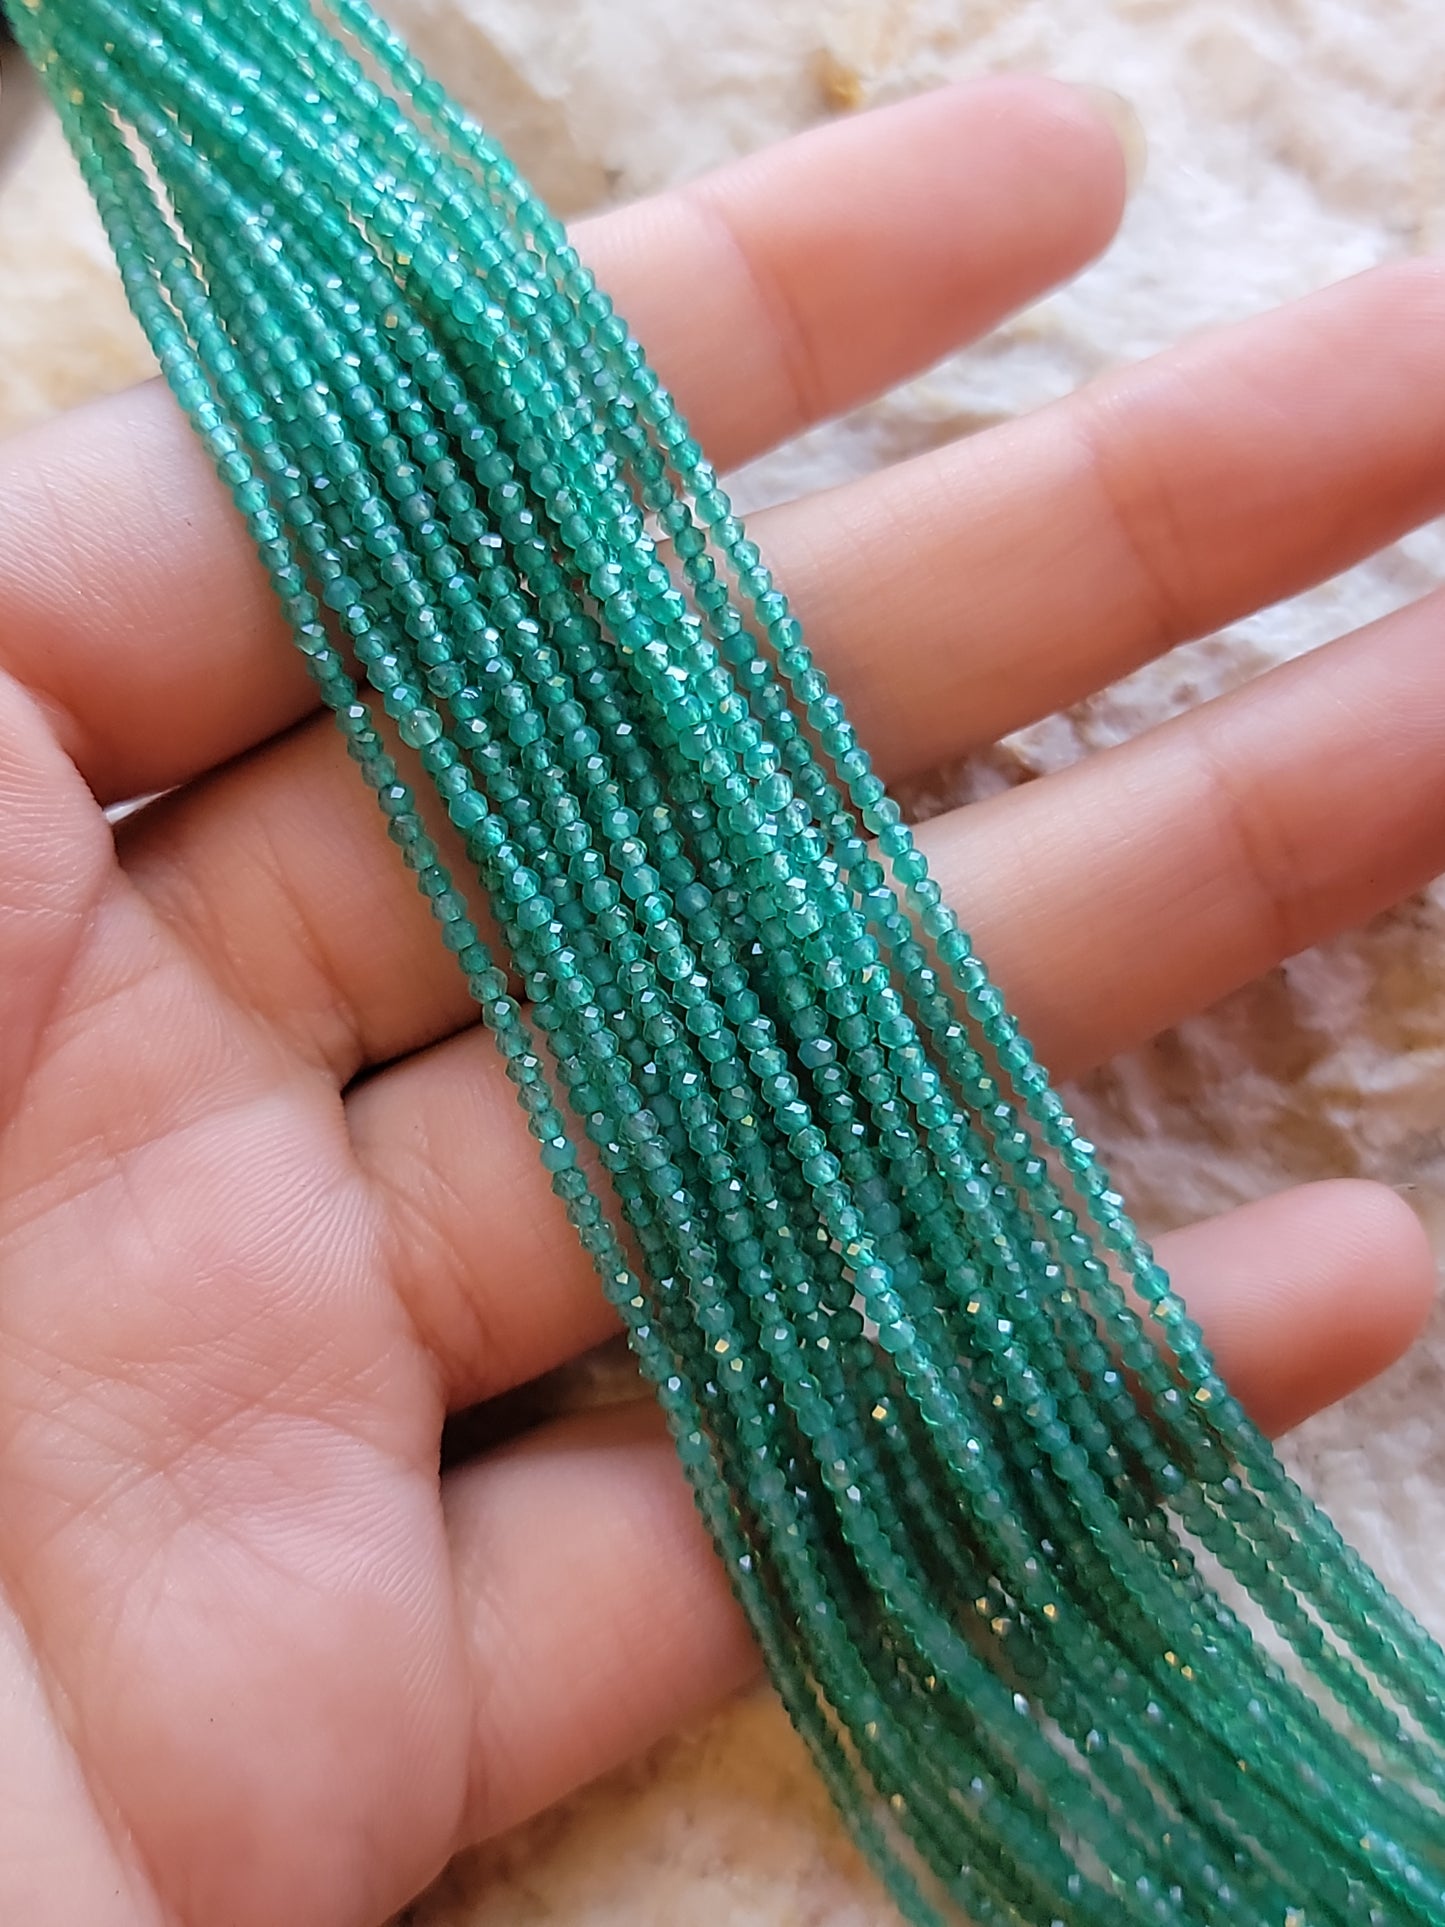 Crafting supplies such as green onyx beads available at wholesale and retail prices, only at our crystal shop in San Diego!